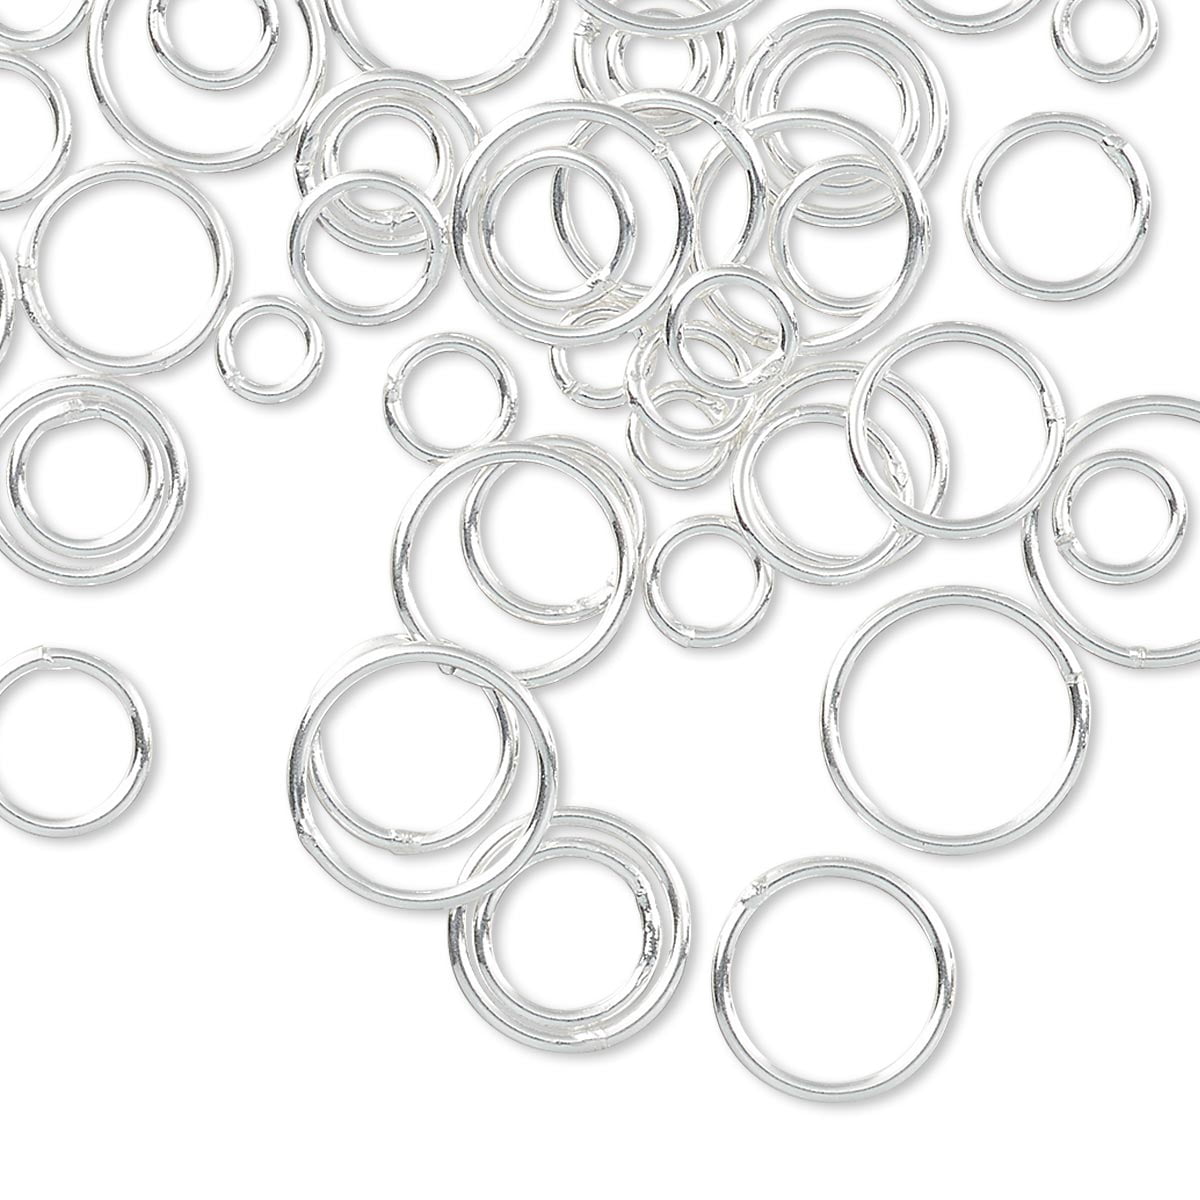 Closed 10mm Diameter 20 Gauge Beadaholique Jump Rings Silver Plated 20 Pieces 